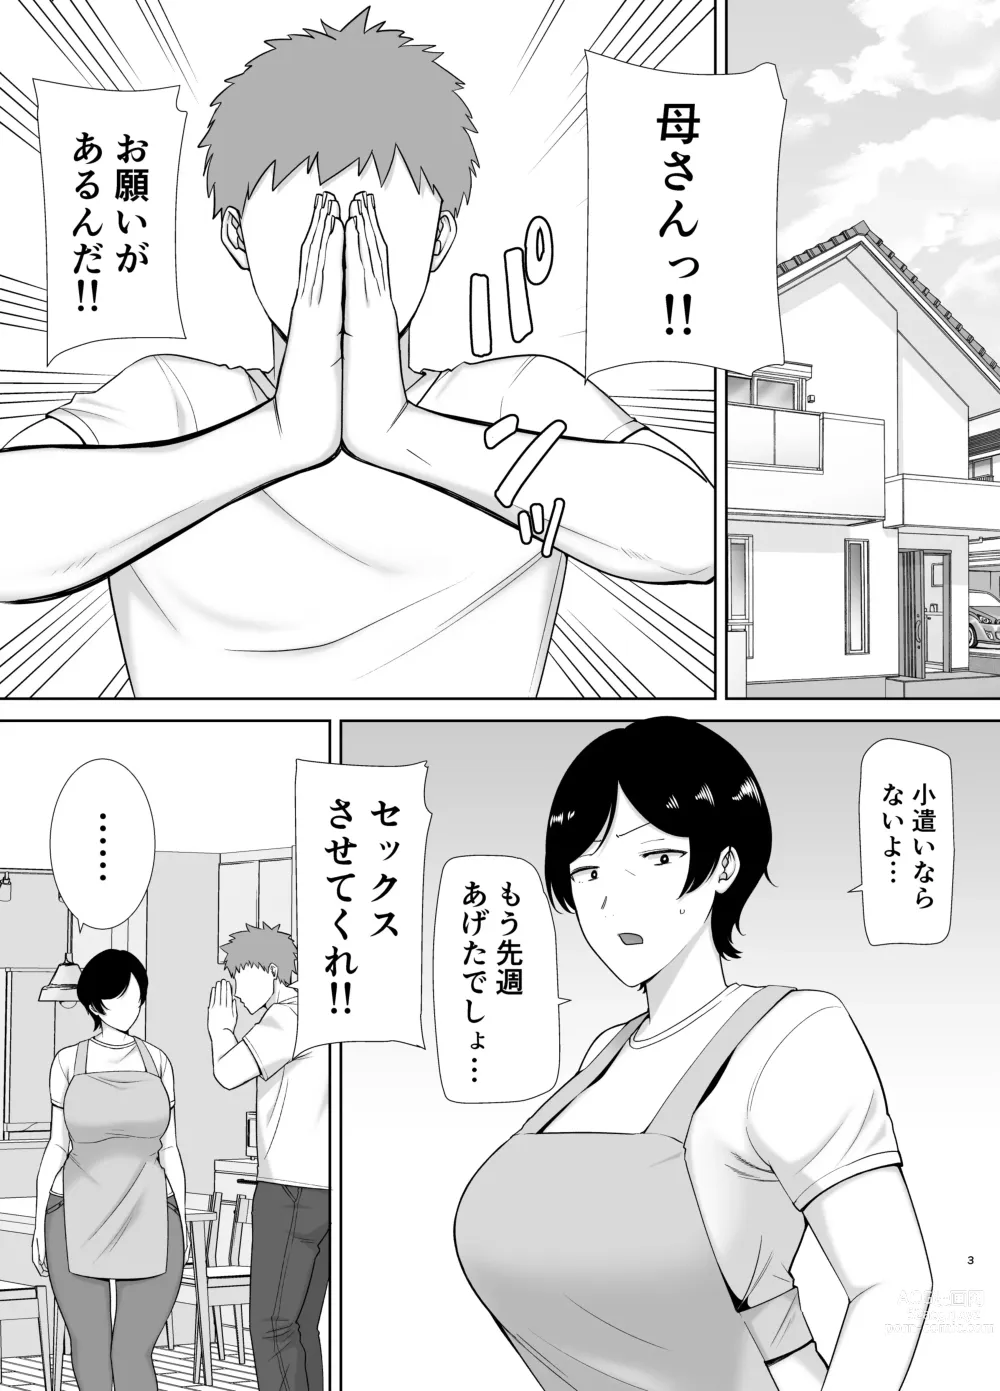 Page 2 of doujinshi 母さんだって女なんだよ！